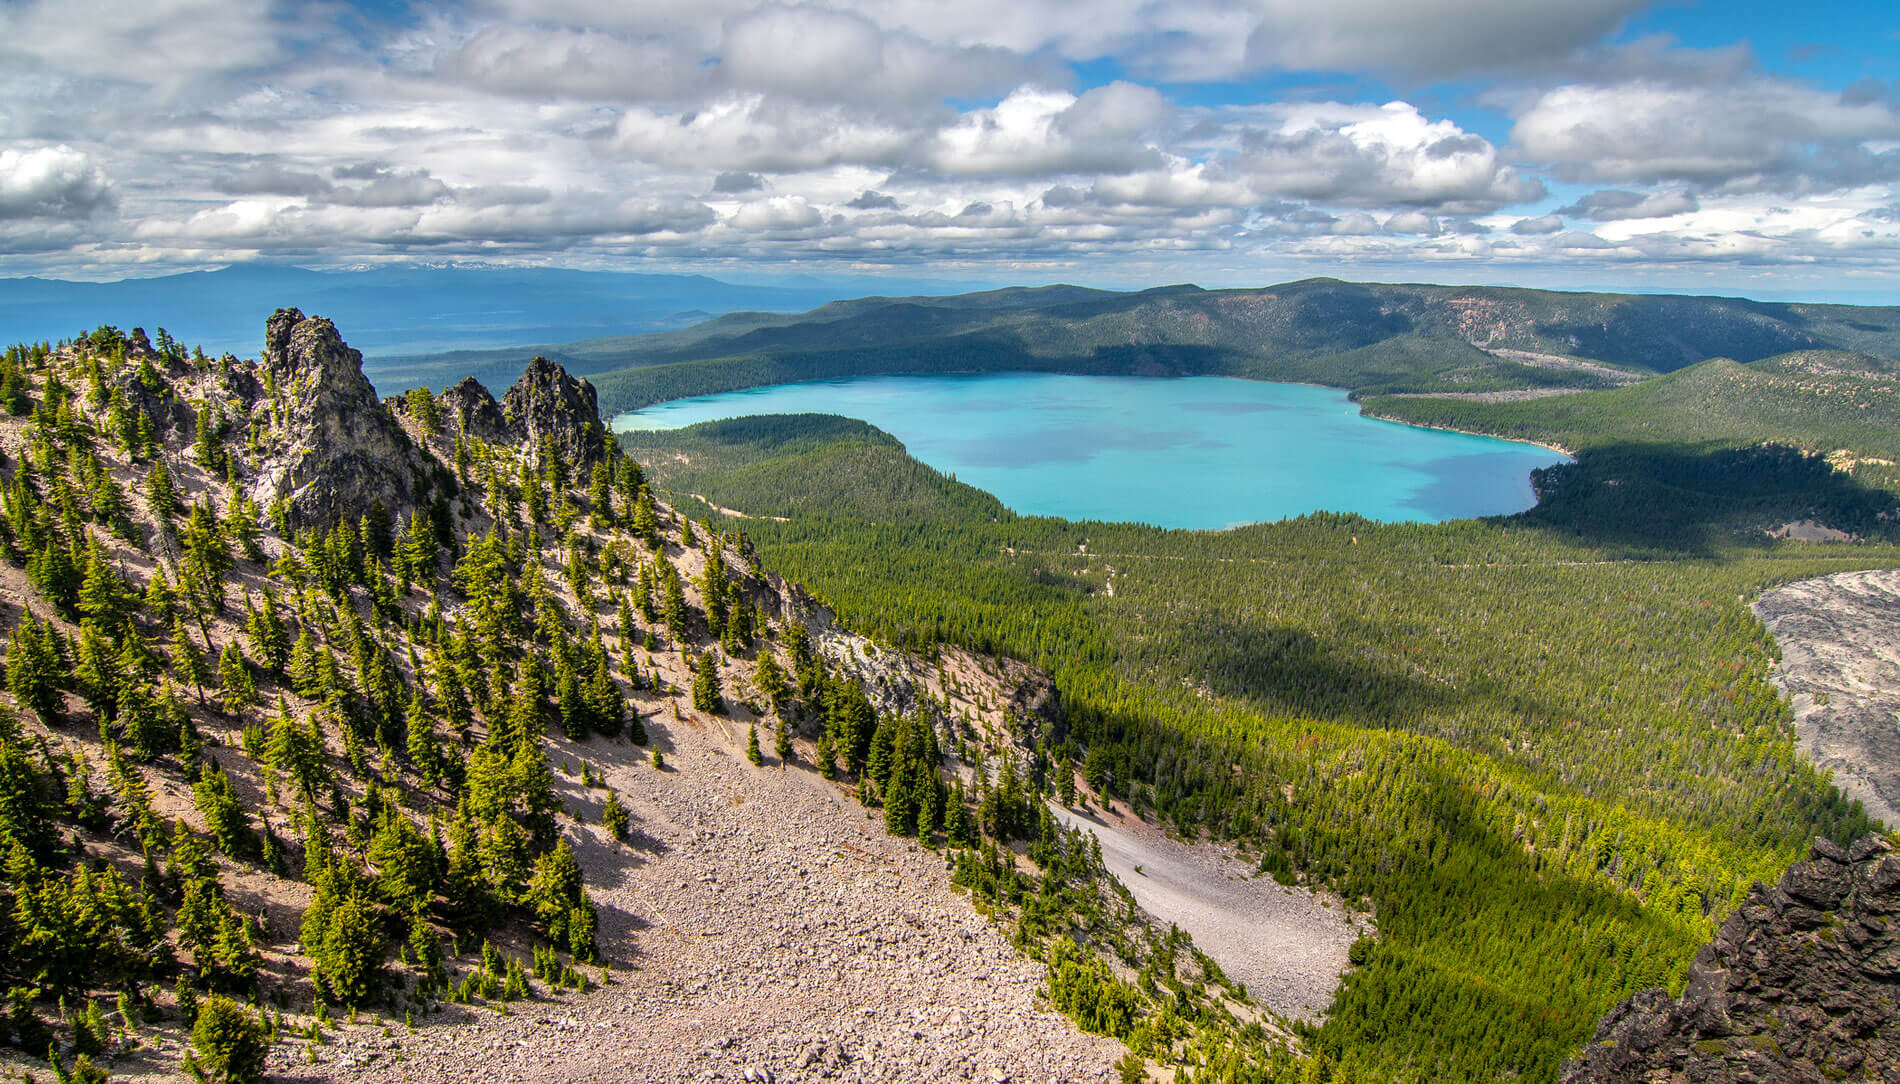 Paulina Lake viewed from Paulina Peak, the highest point in Oregon's Newberry National Volcanic Monument